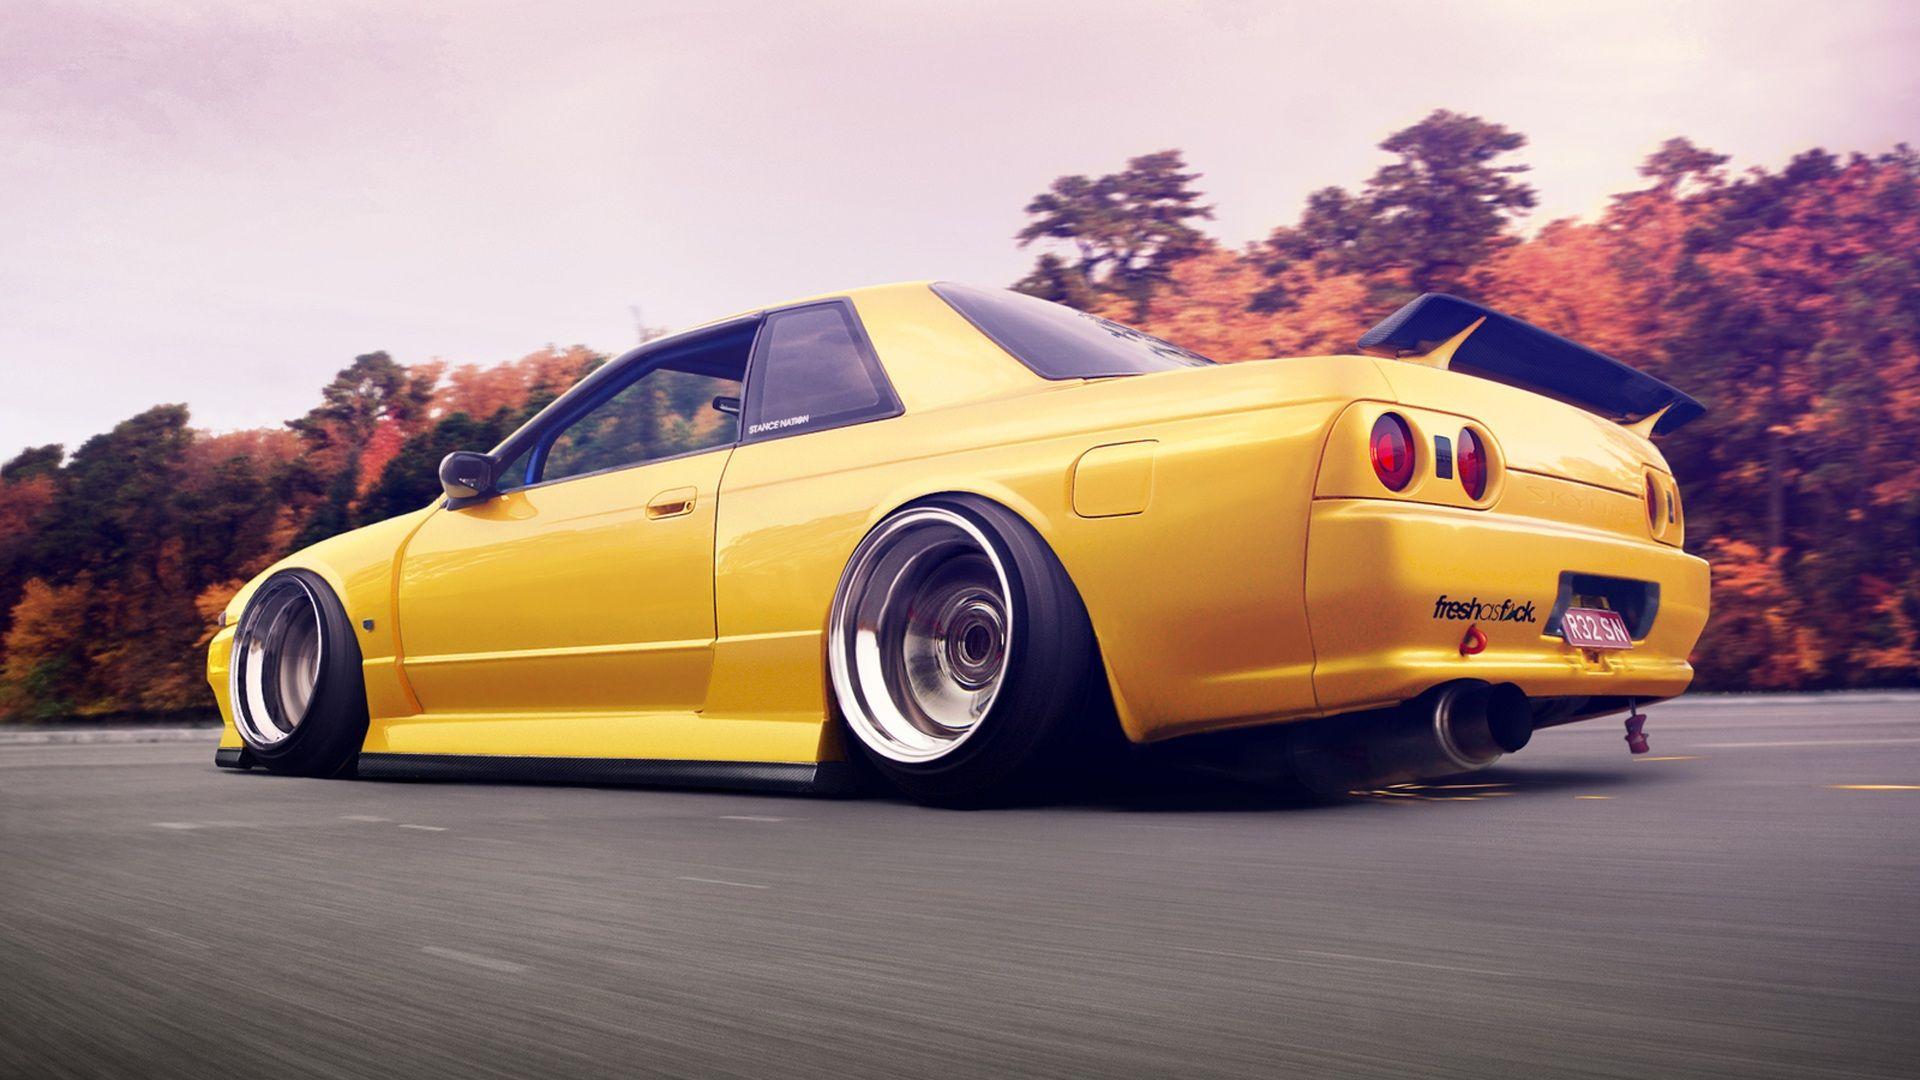 Nissan Skyline Wallpaper Collection For Free Download. HD